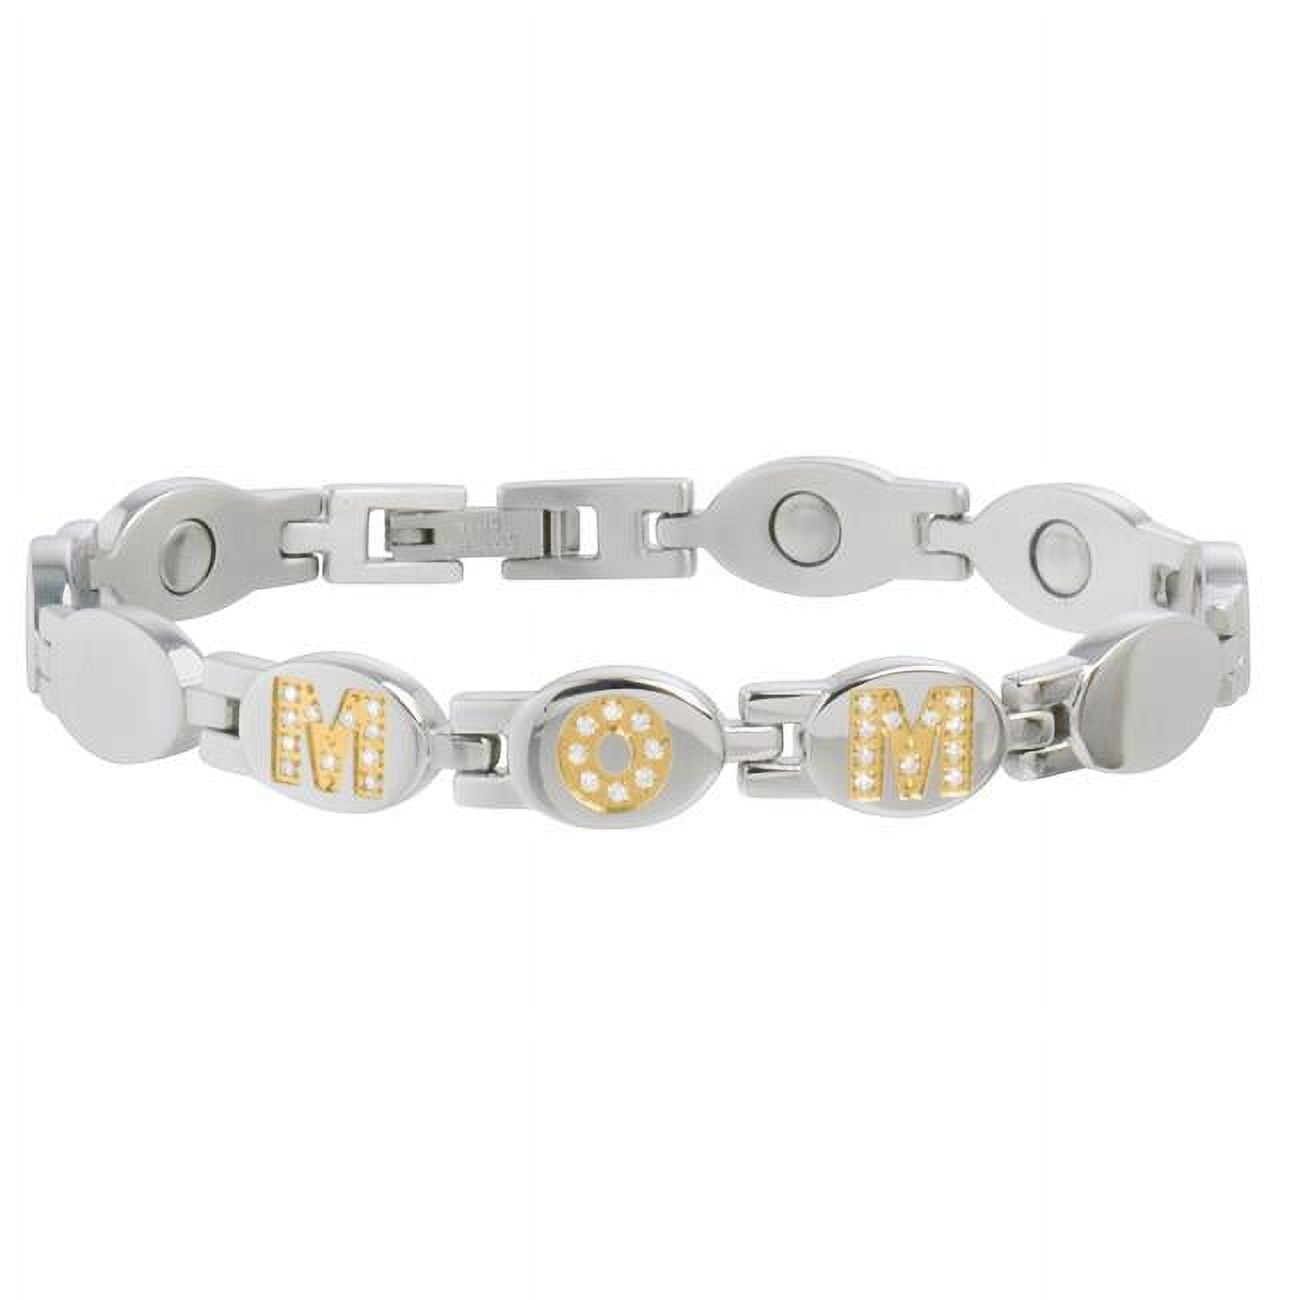 Bio Magnetic Bracelet at best price in Pune by Safe India | ID: 9330534462